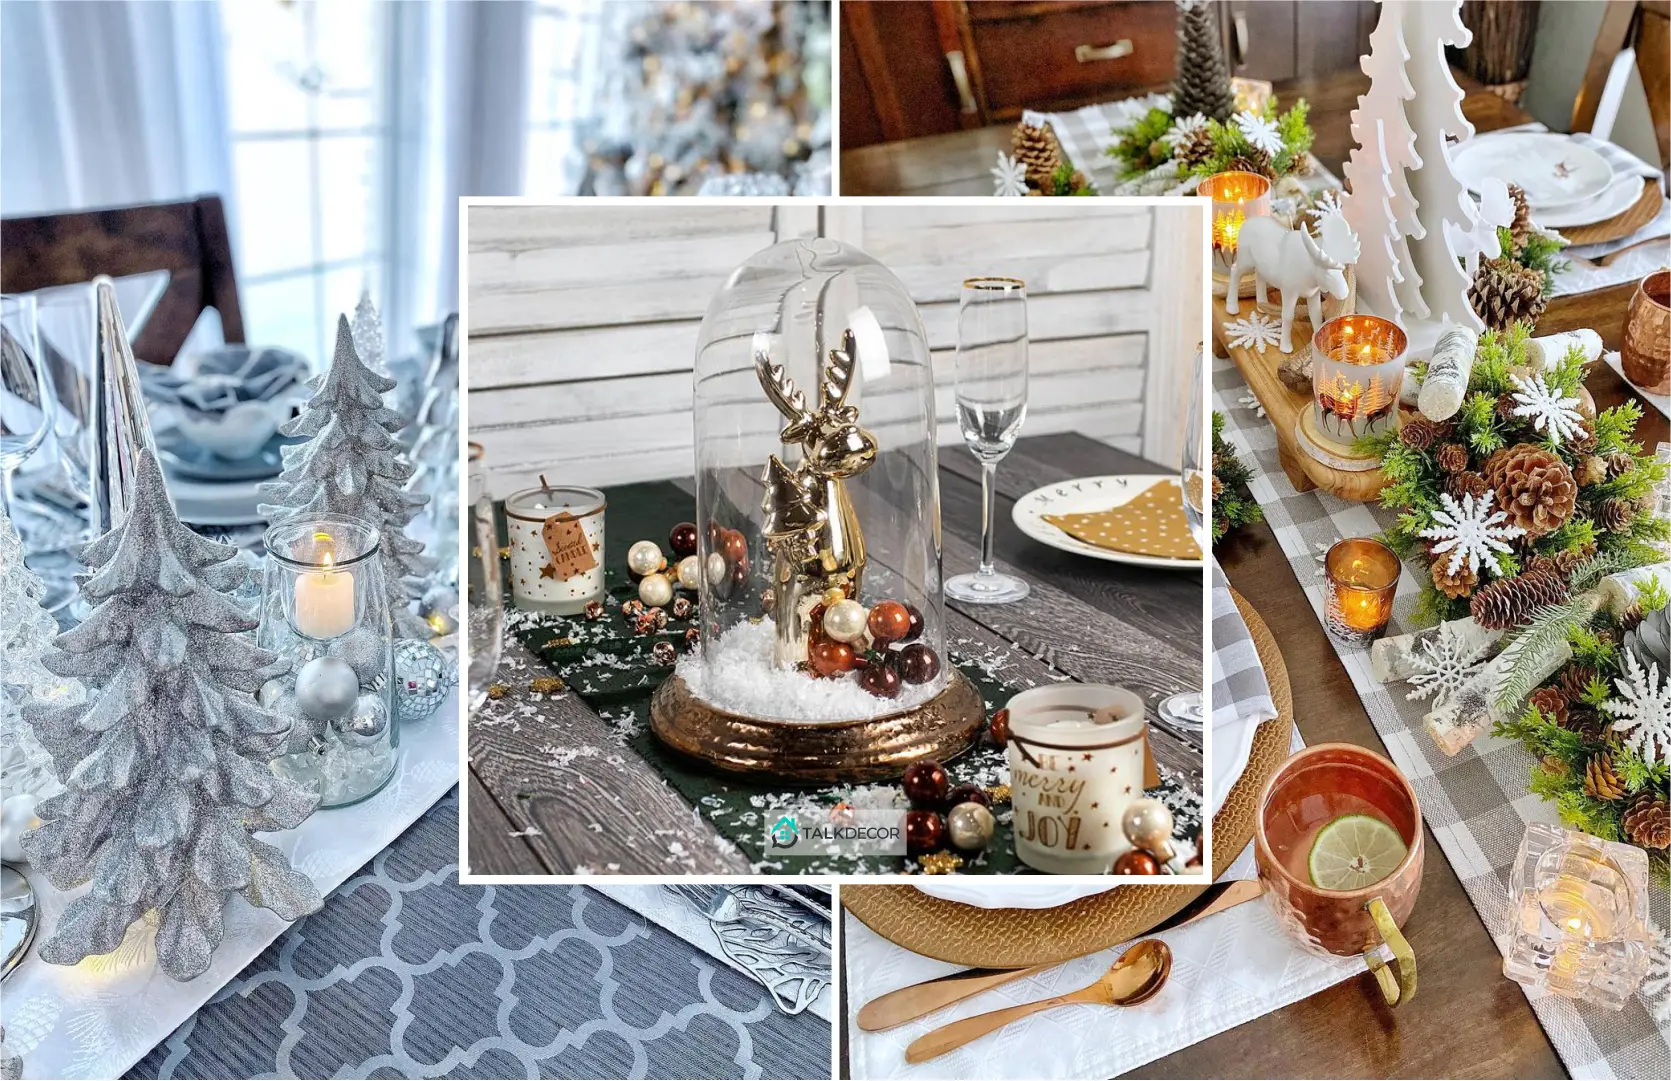 How to Decorate Your Centerpiece with Winter Touches